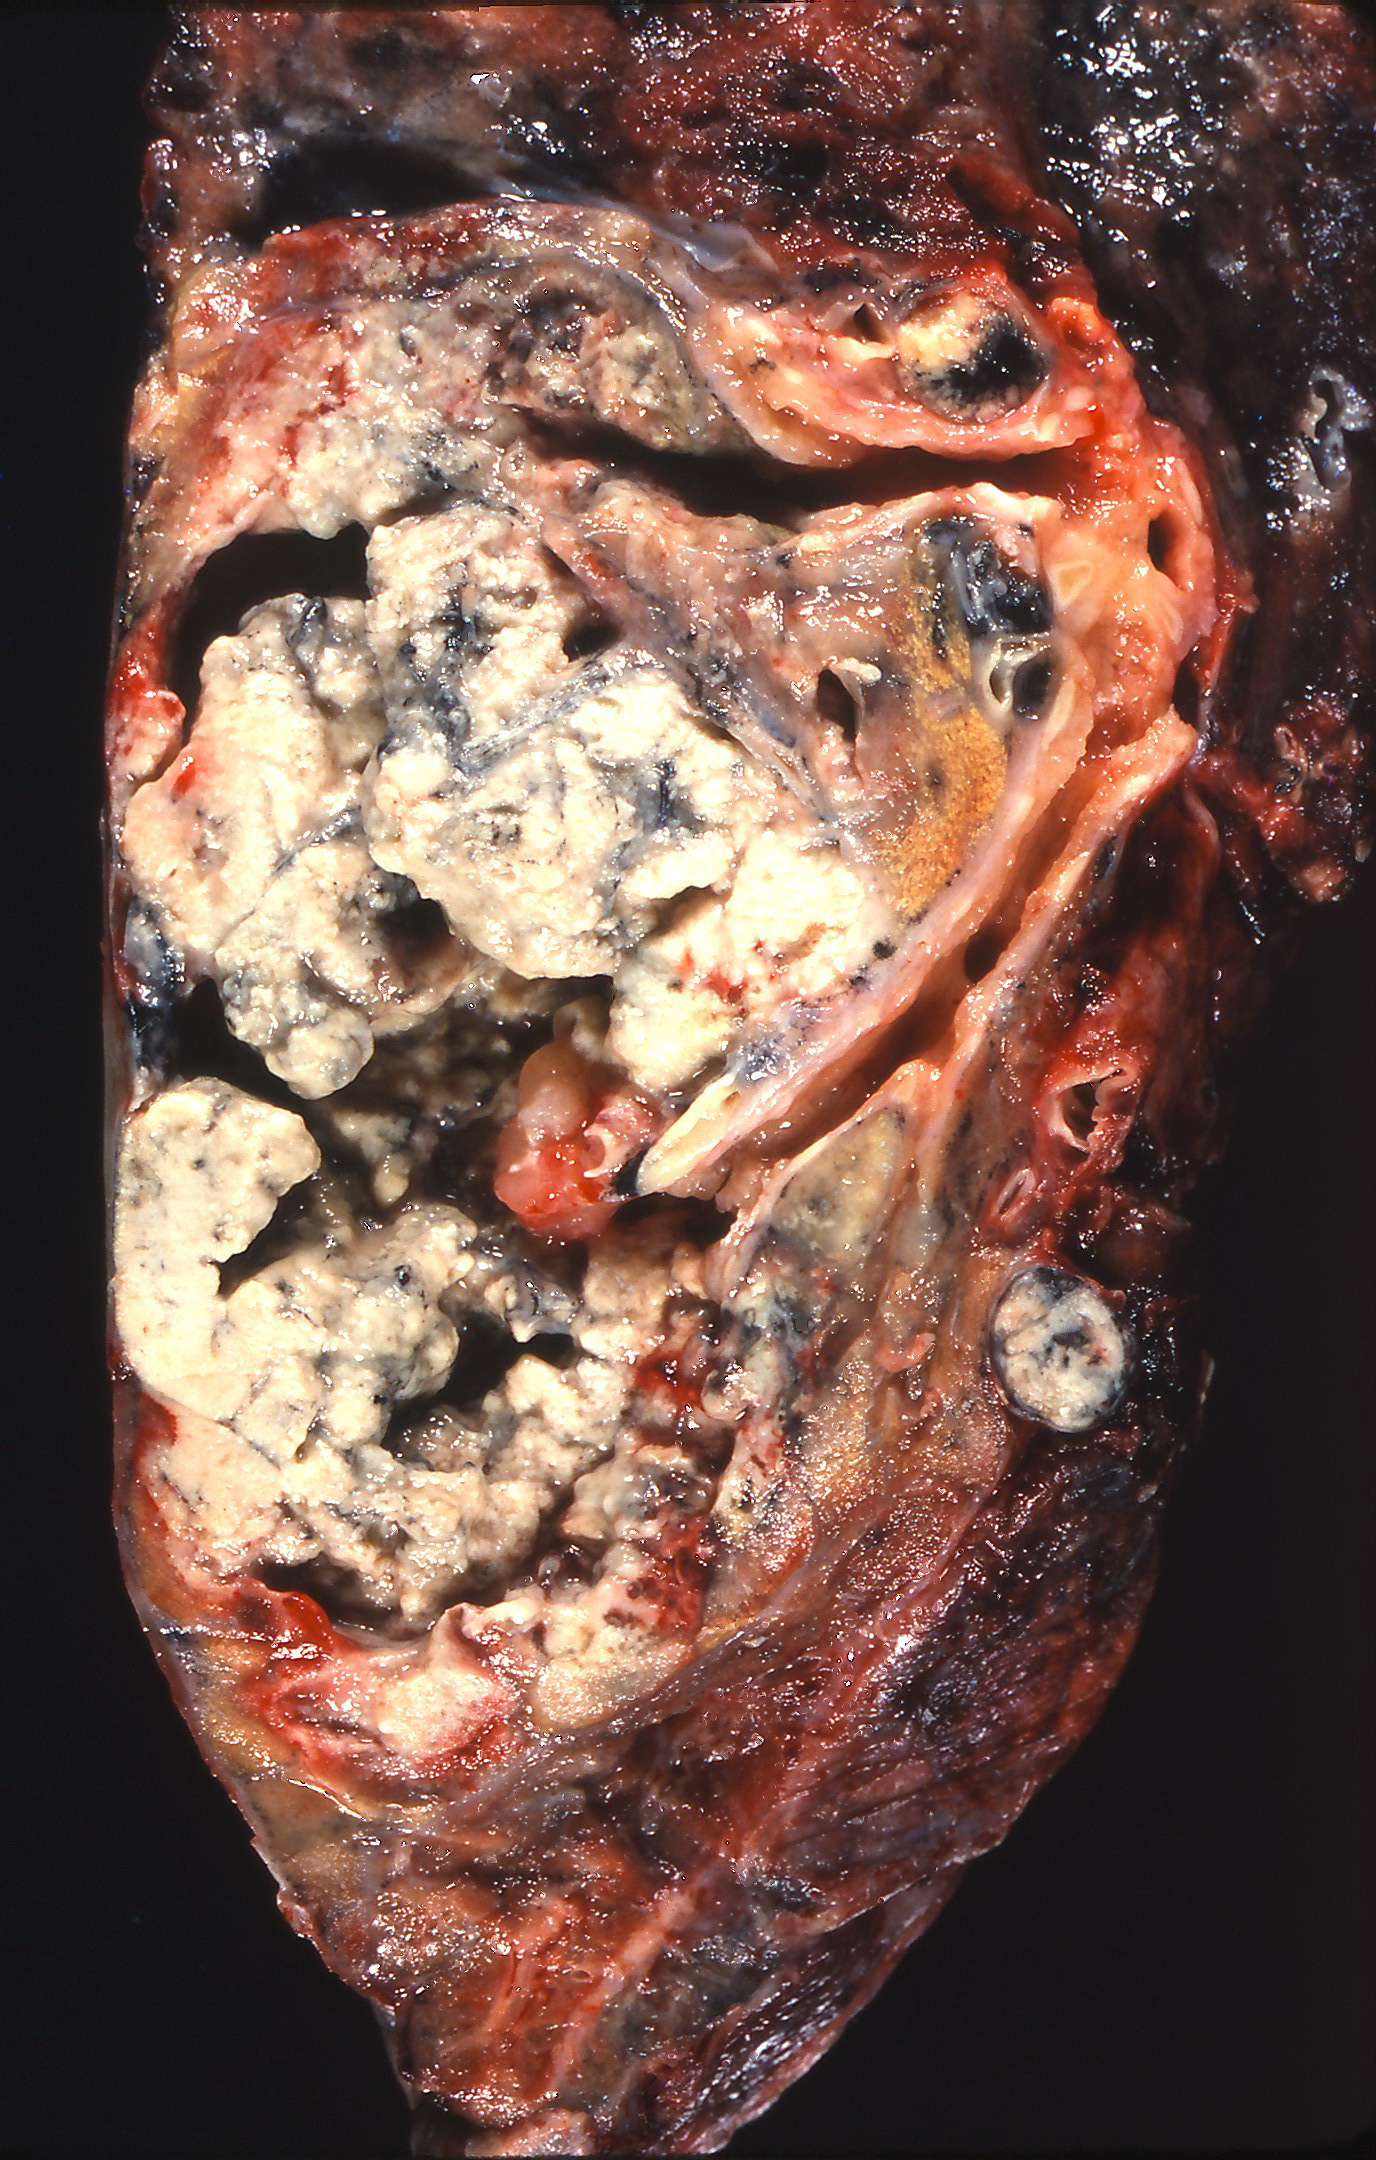 Gross pathology: cavitation, squamous lung cell cancer